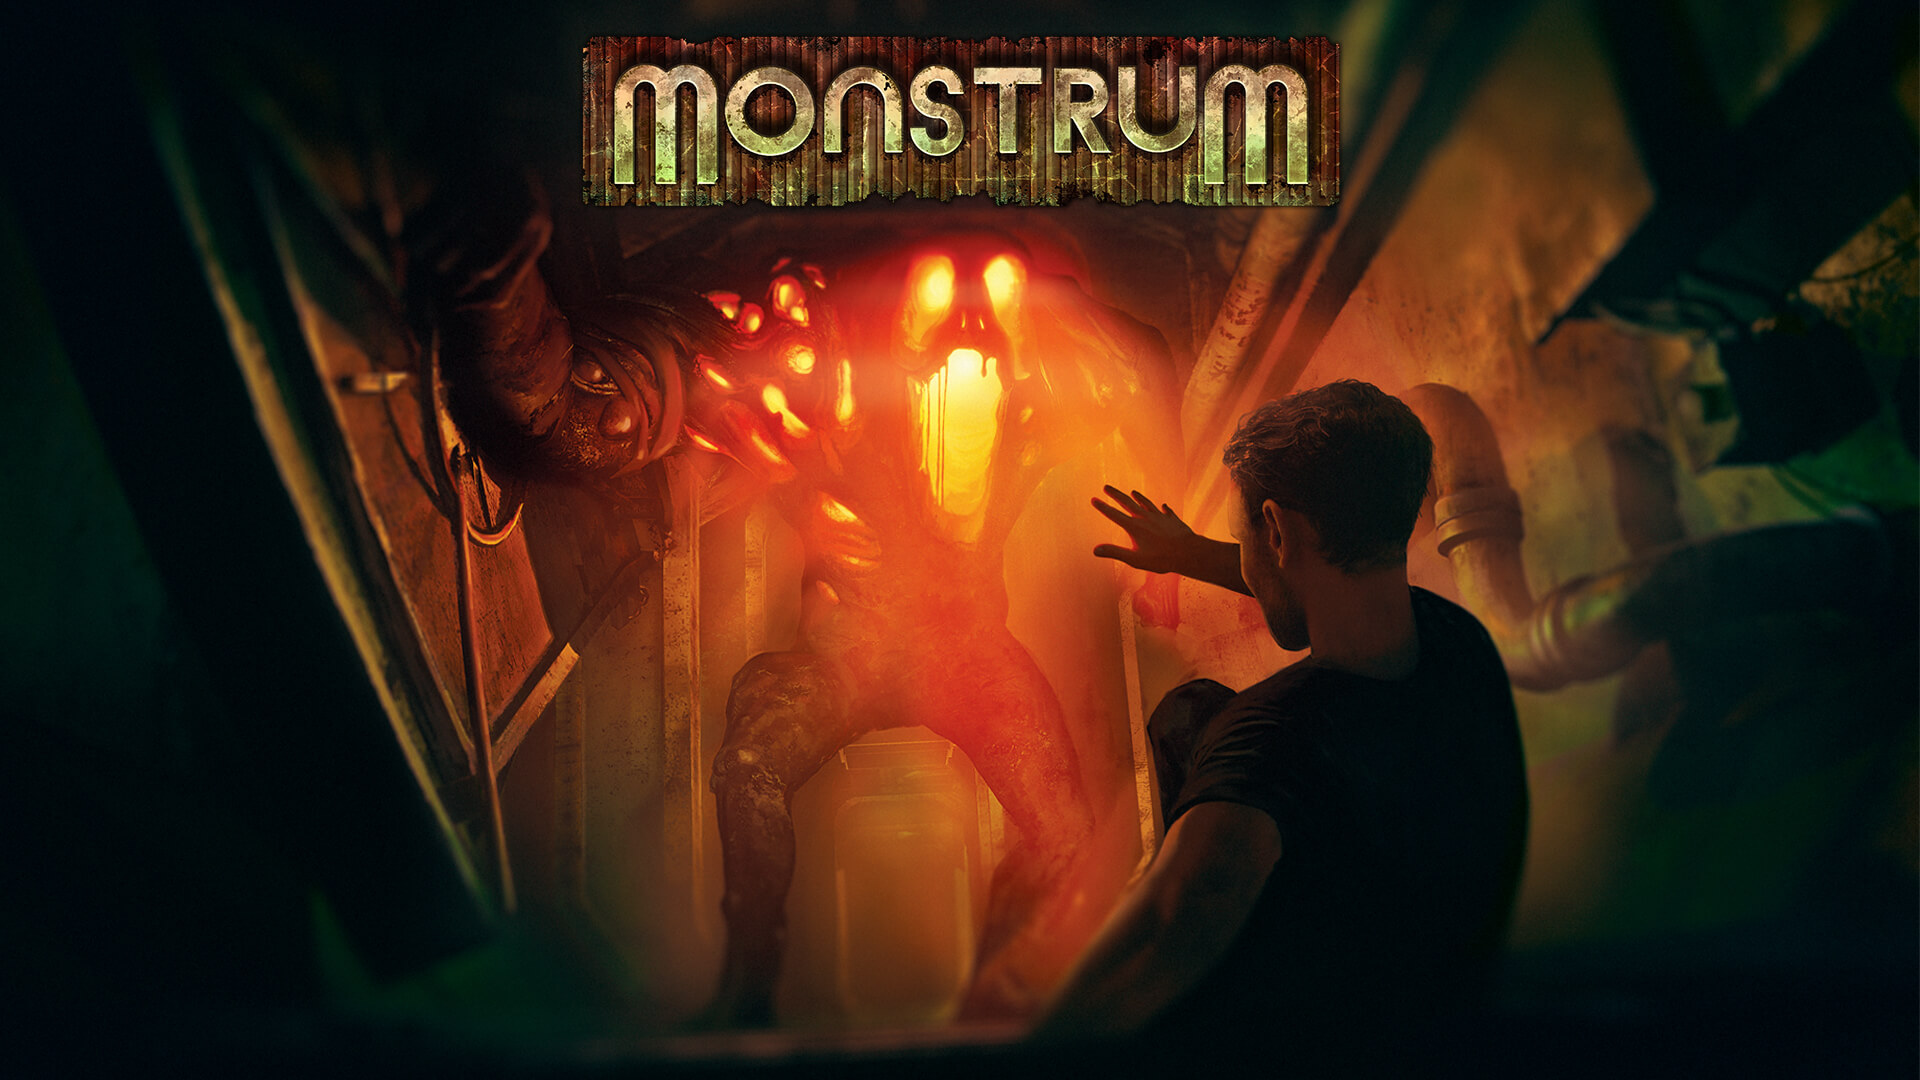 Monstrum: Physical Edition Releases October 23